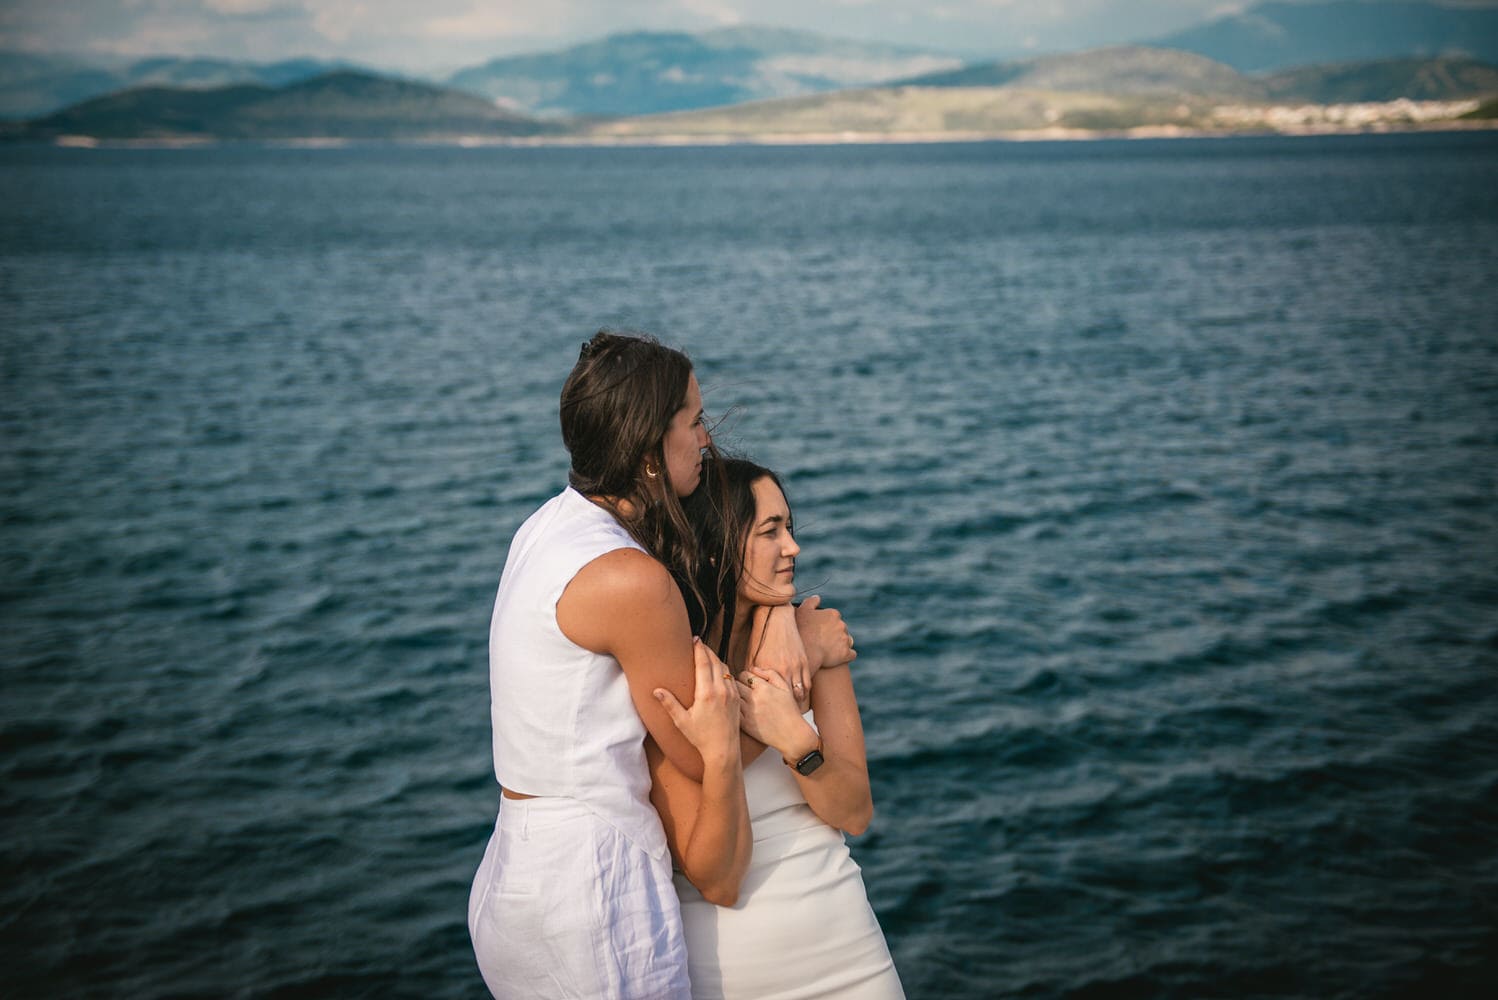 Coastal embrace: Brides walk along the shore, love's journey carried by the waves during their Corfu elopement.